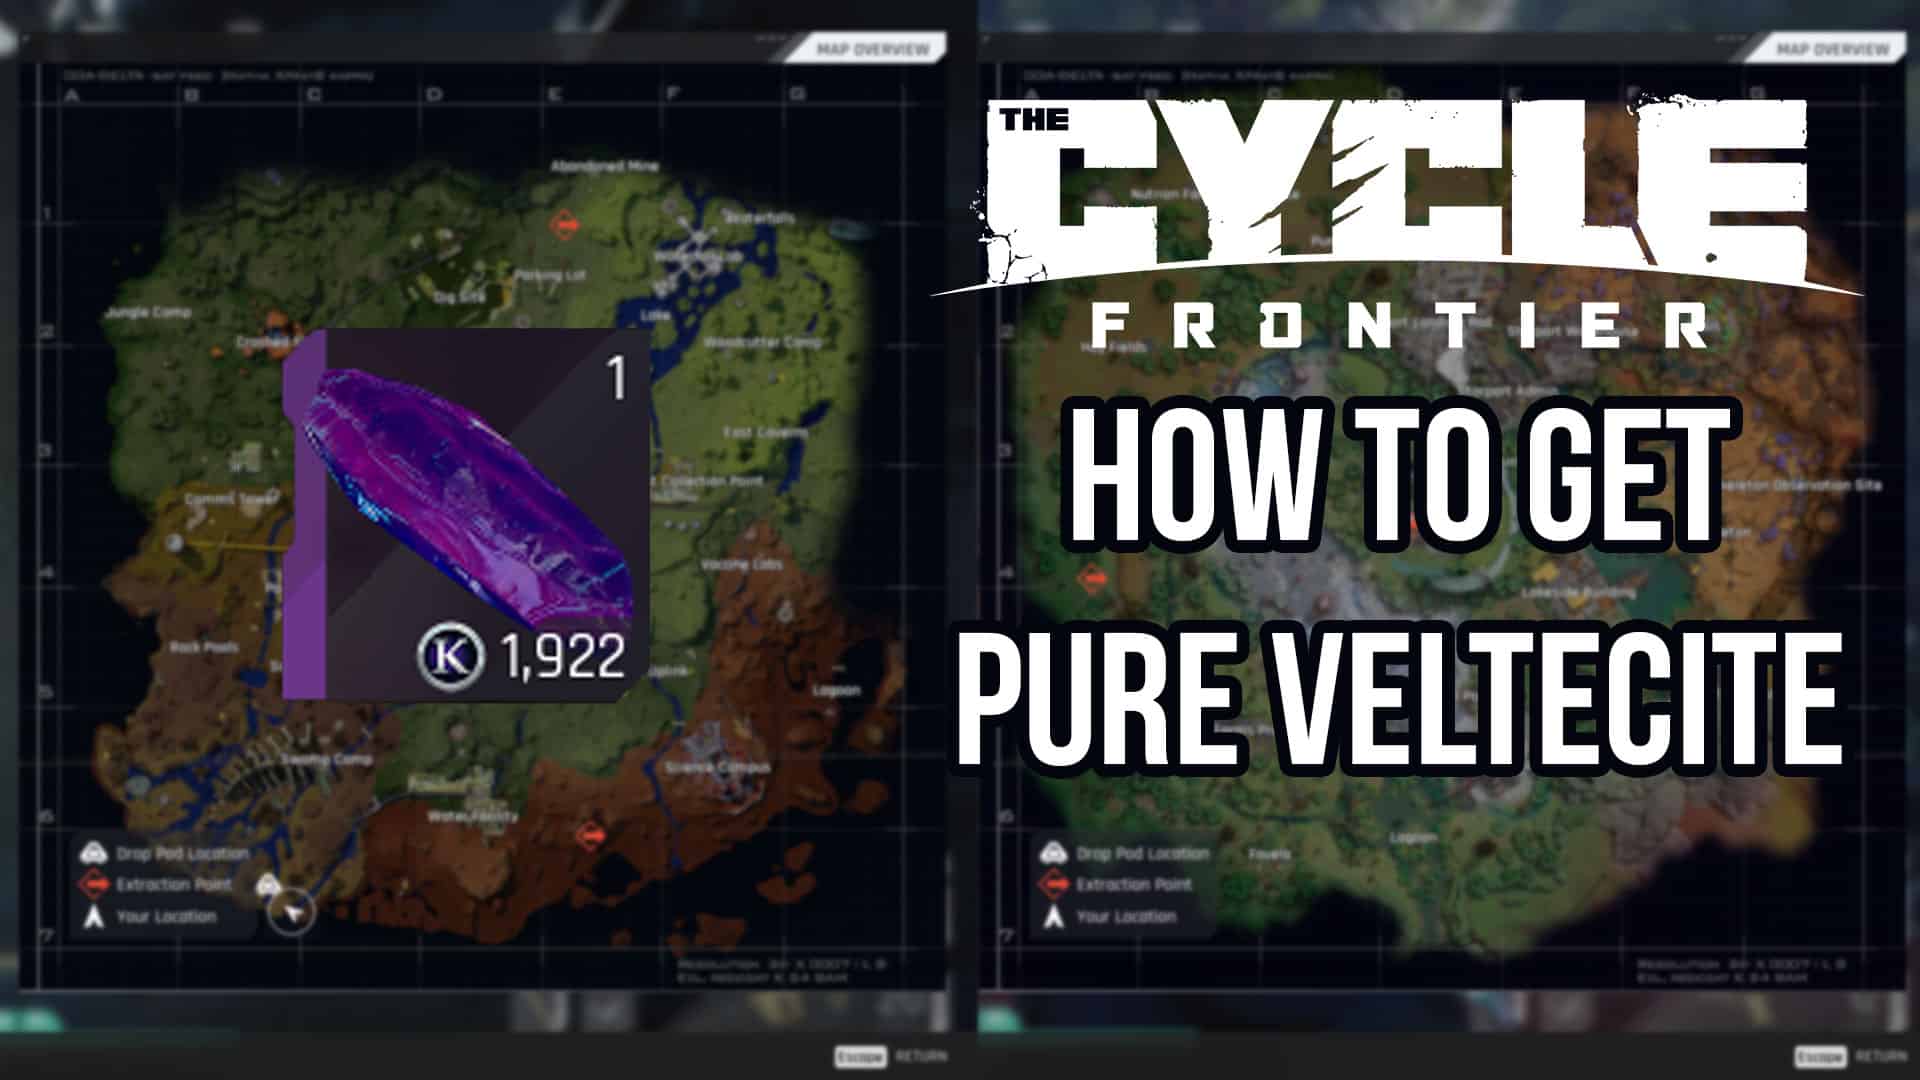 the cycle frontier how to get pure veltecite